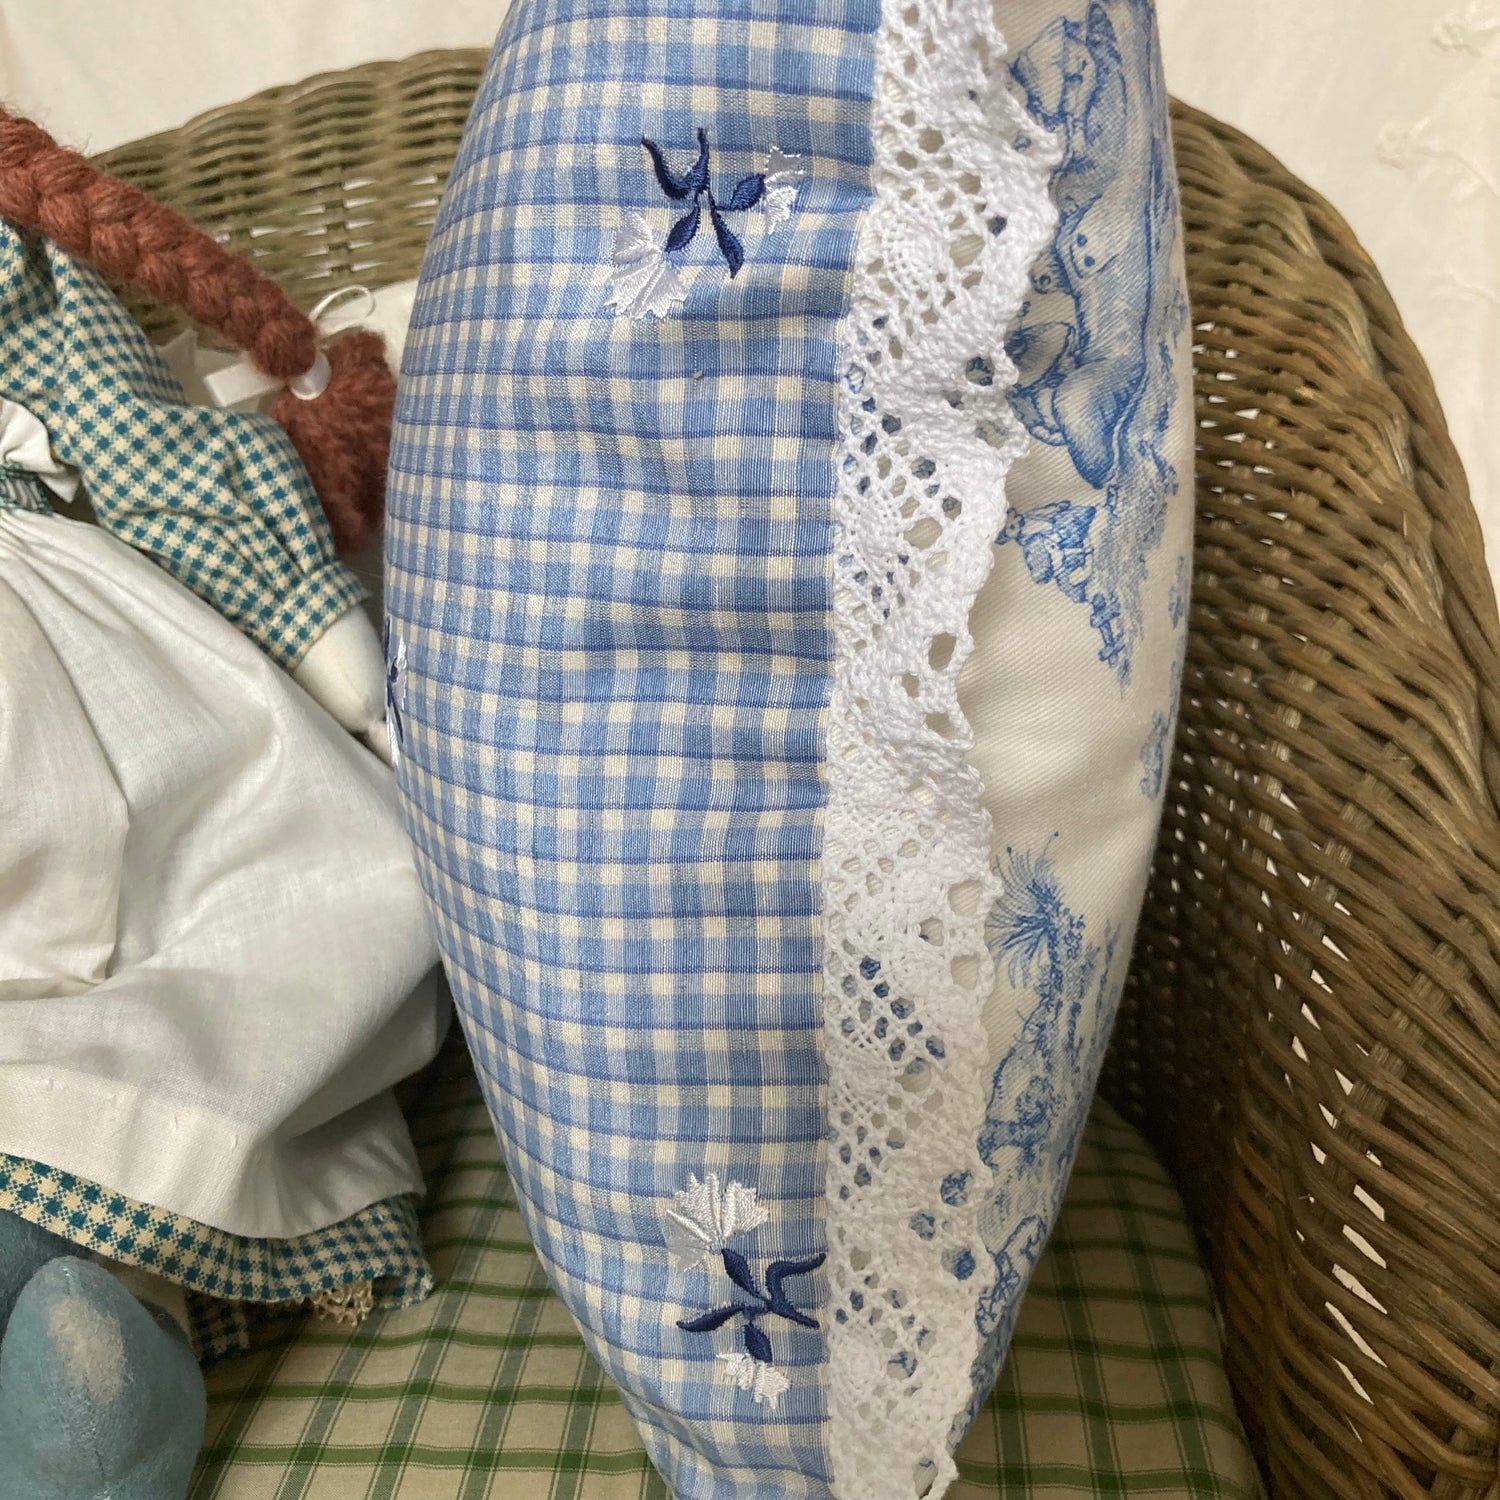 Nursery Rhymes Gingham Blue 13 x 13 Square Decorative Pillow Side with Down Feather Insert